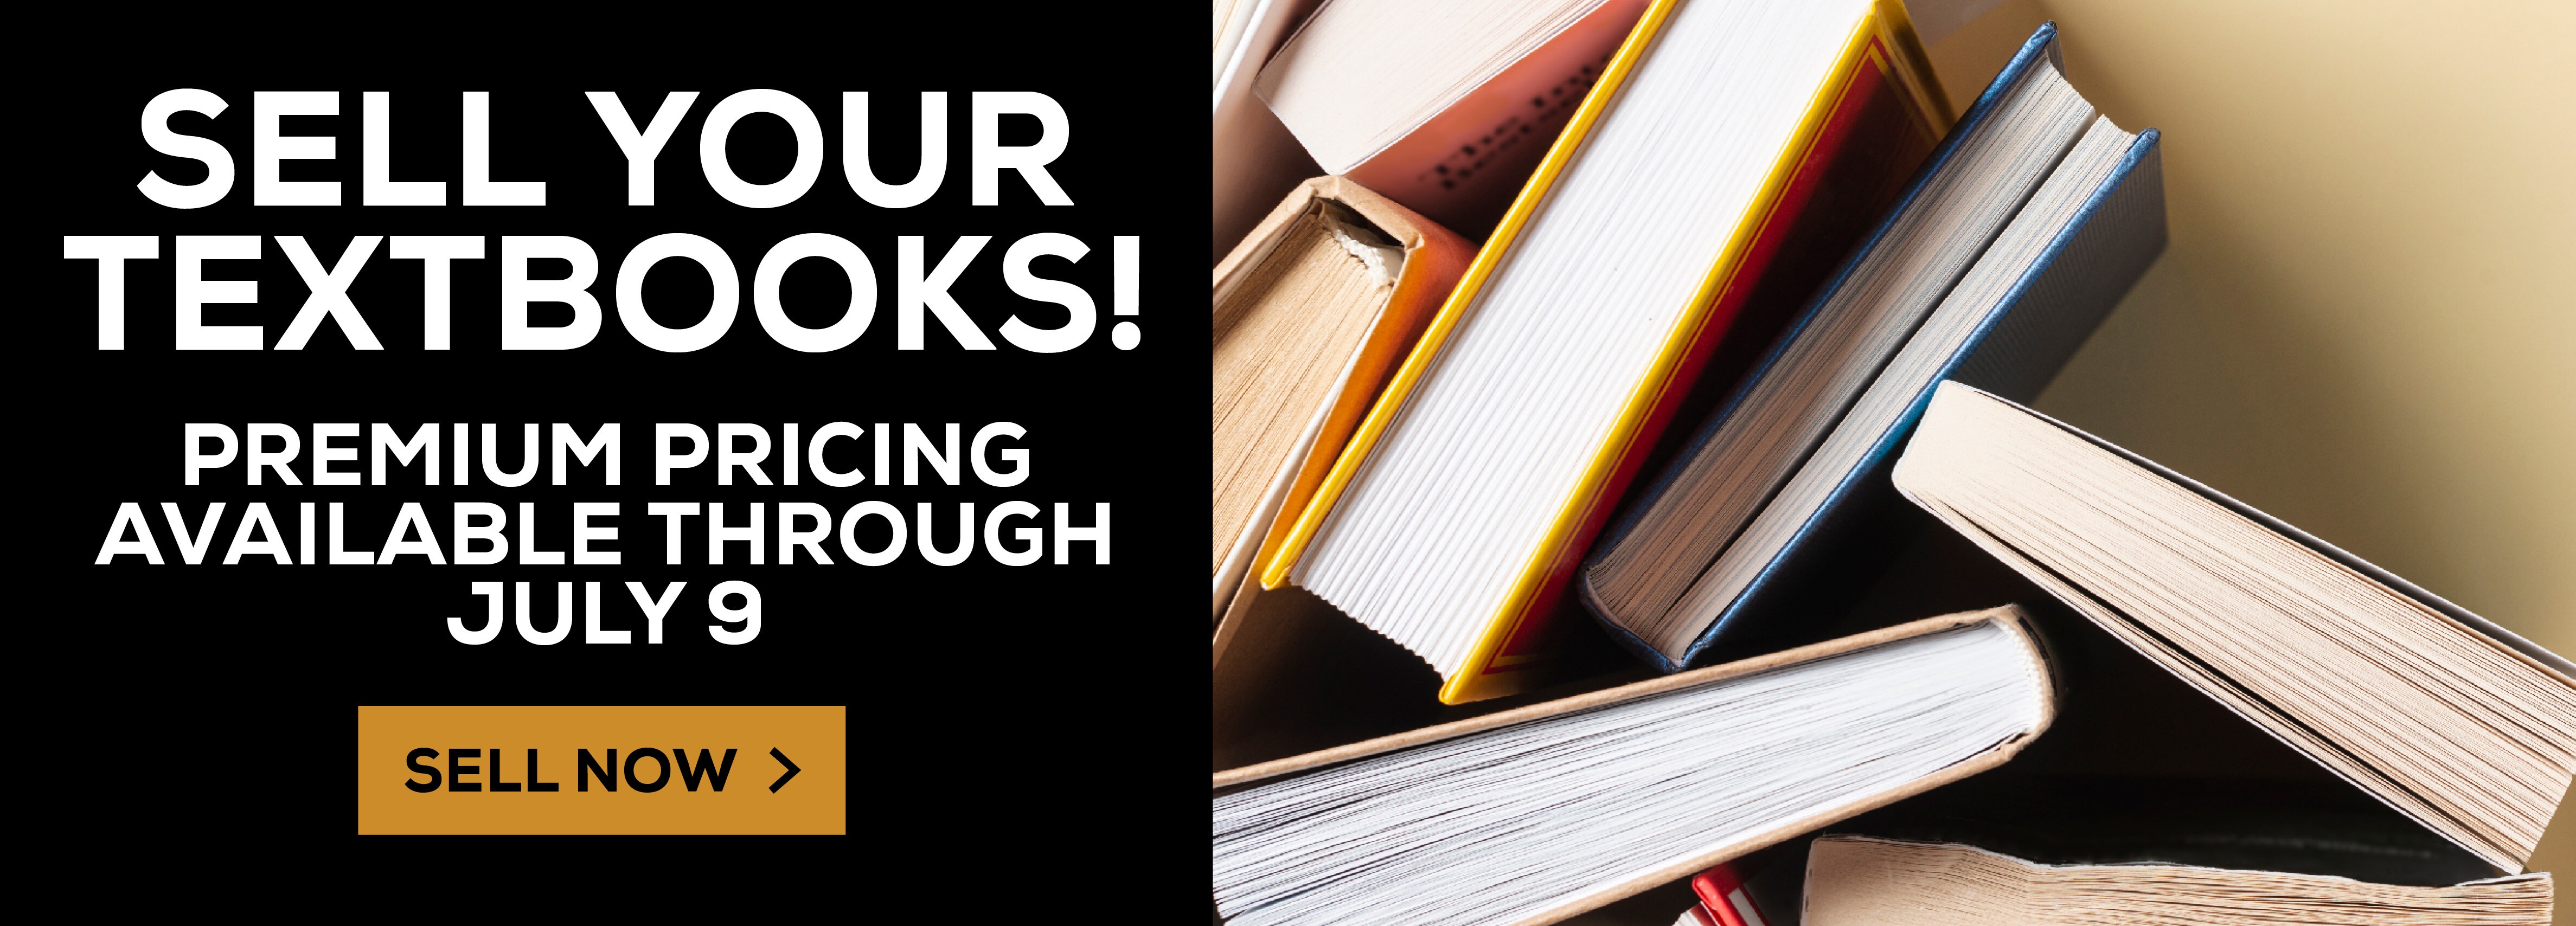 Sell Your Textbooks! Premium pricing available through July 9. Sell Now!					